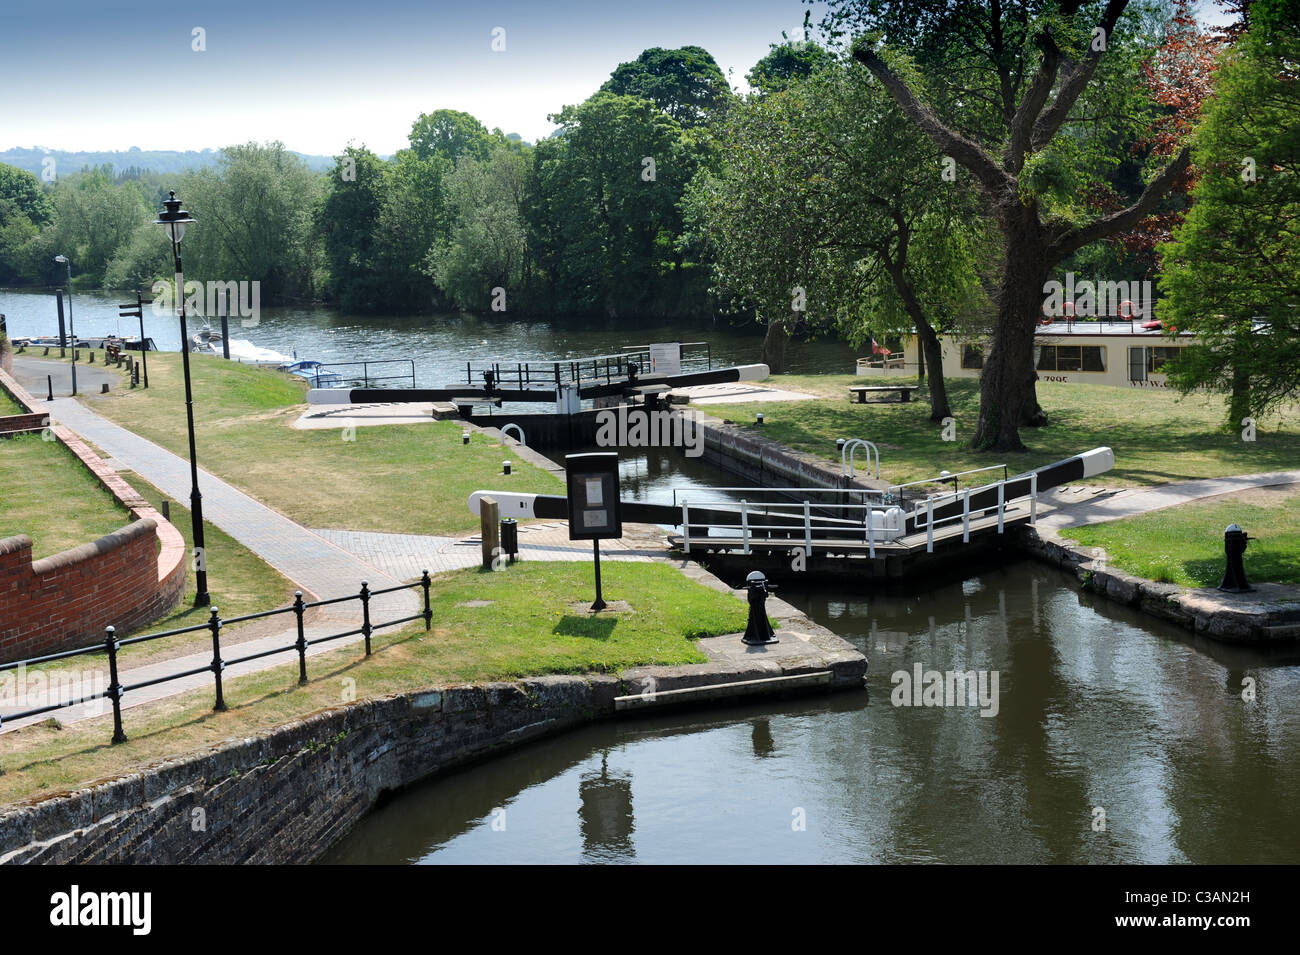 Locks linking the canal to the river at Stourport on Severn Worcestershire England Uk Stock Photo